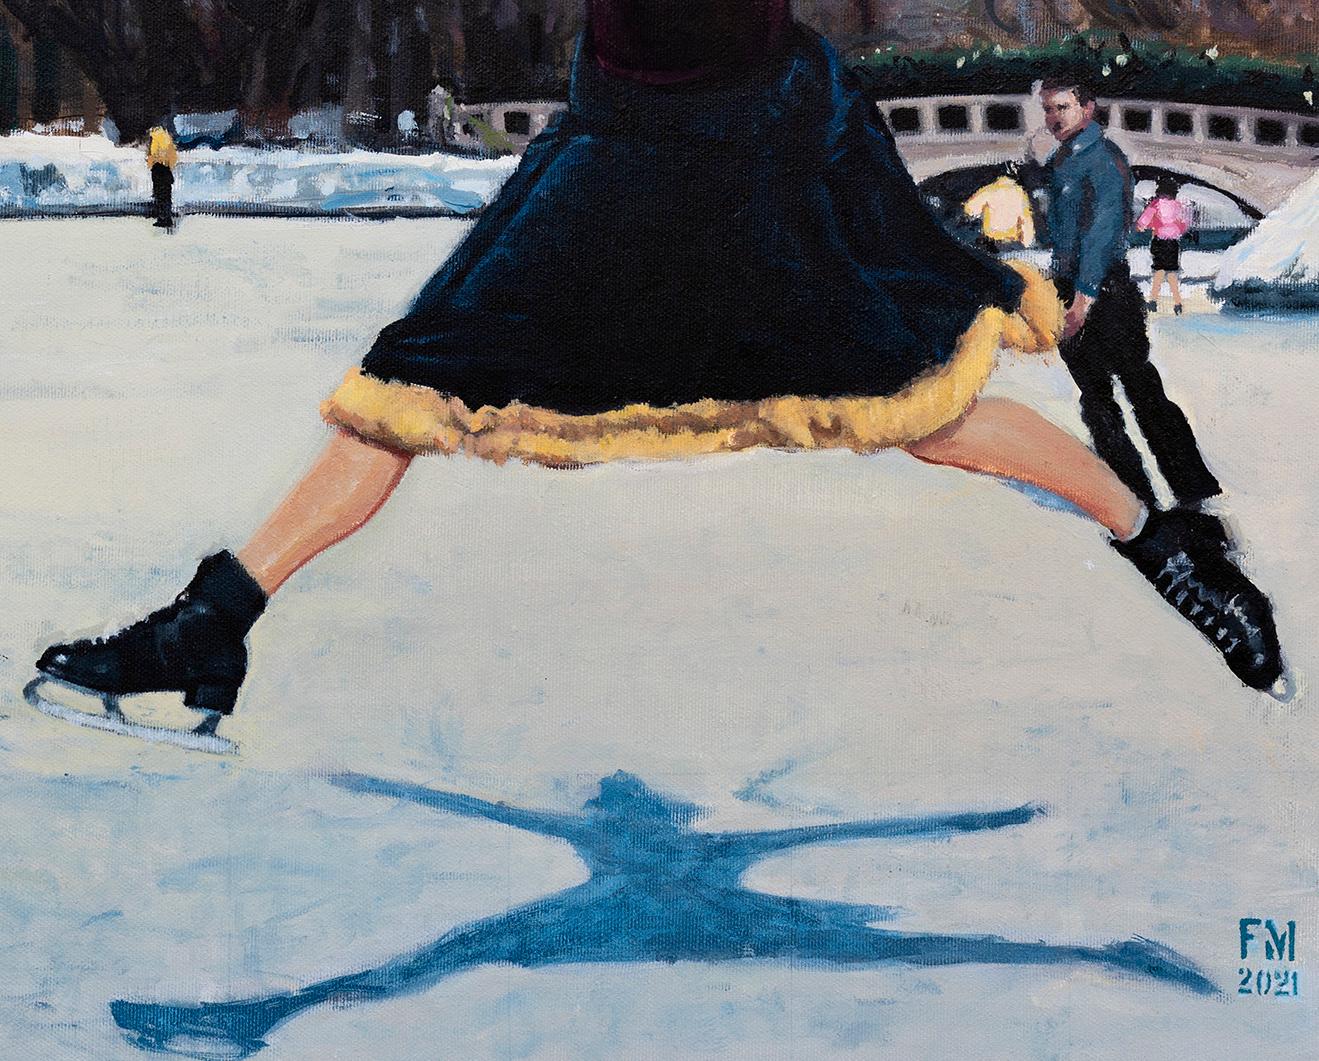 Floating Between Wars - Contemporary, Cityscape, Skate, Woman, Winter, White - Blue Figurative Painting by Mihai Florea